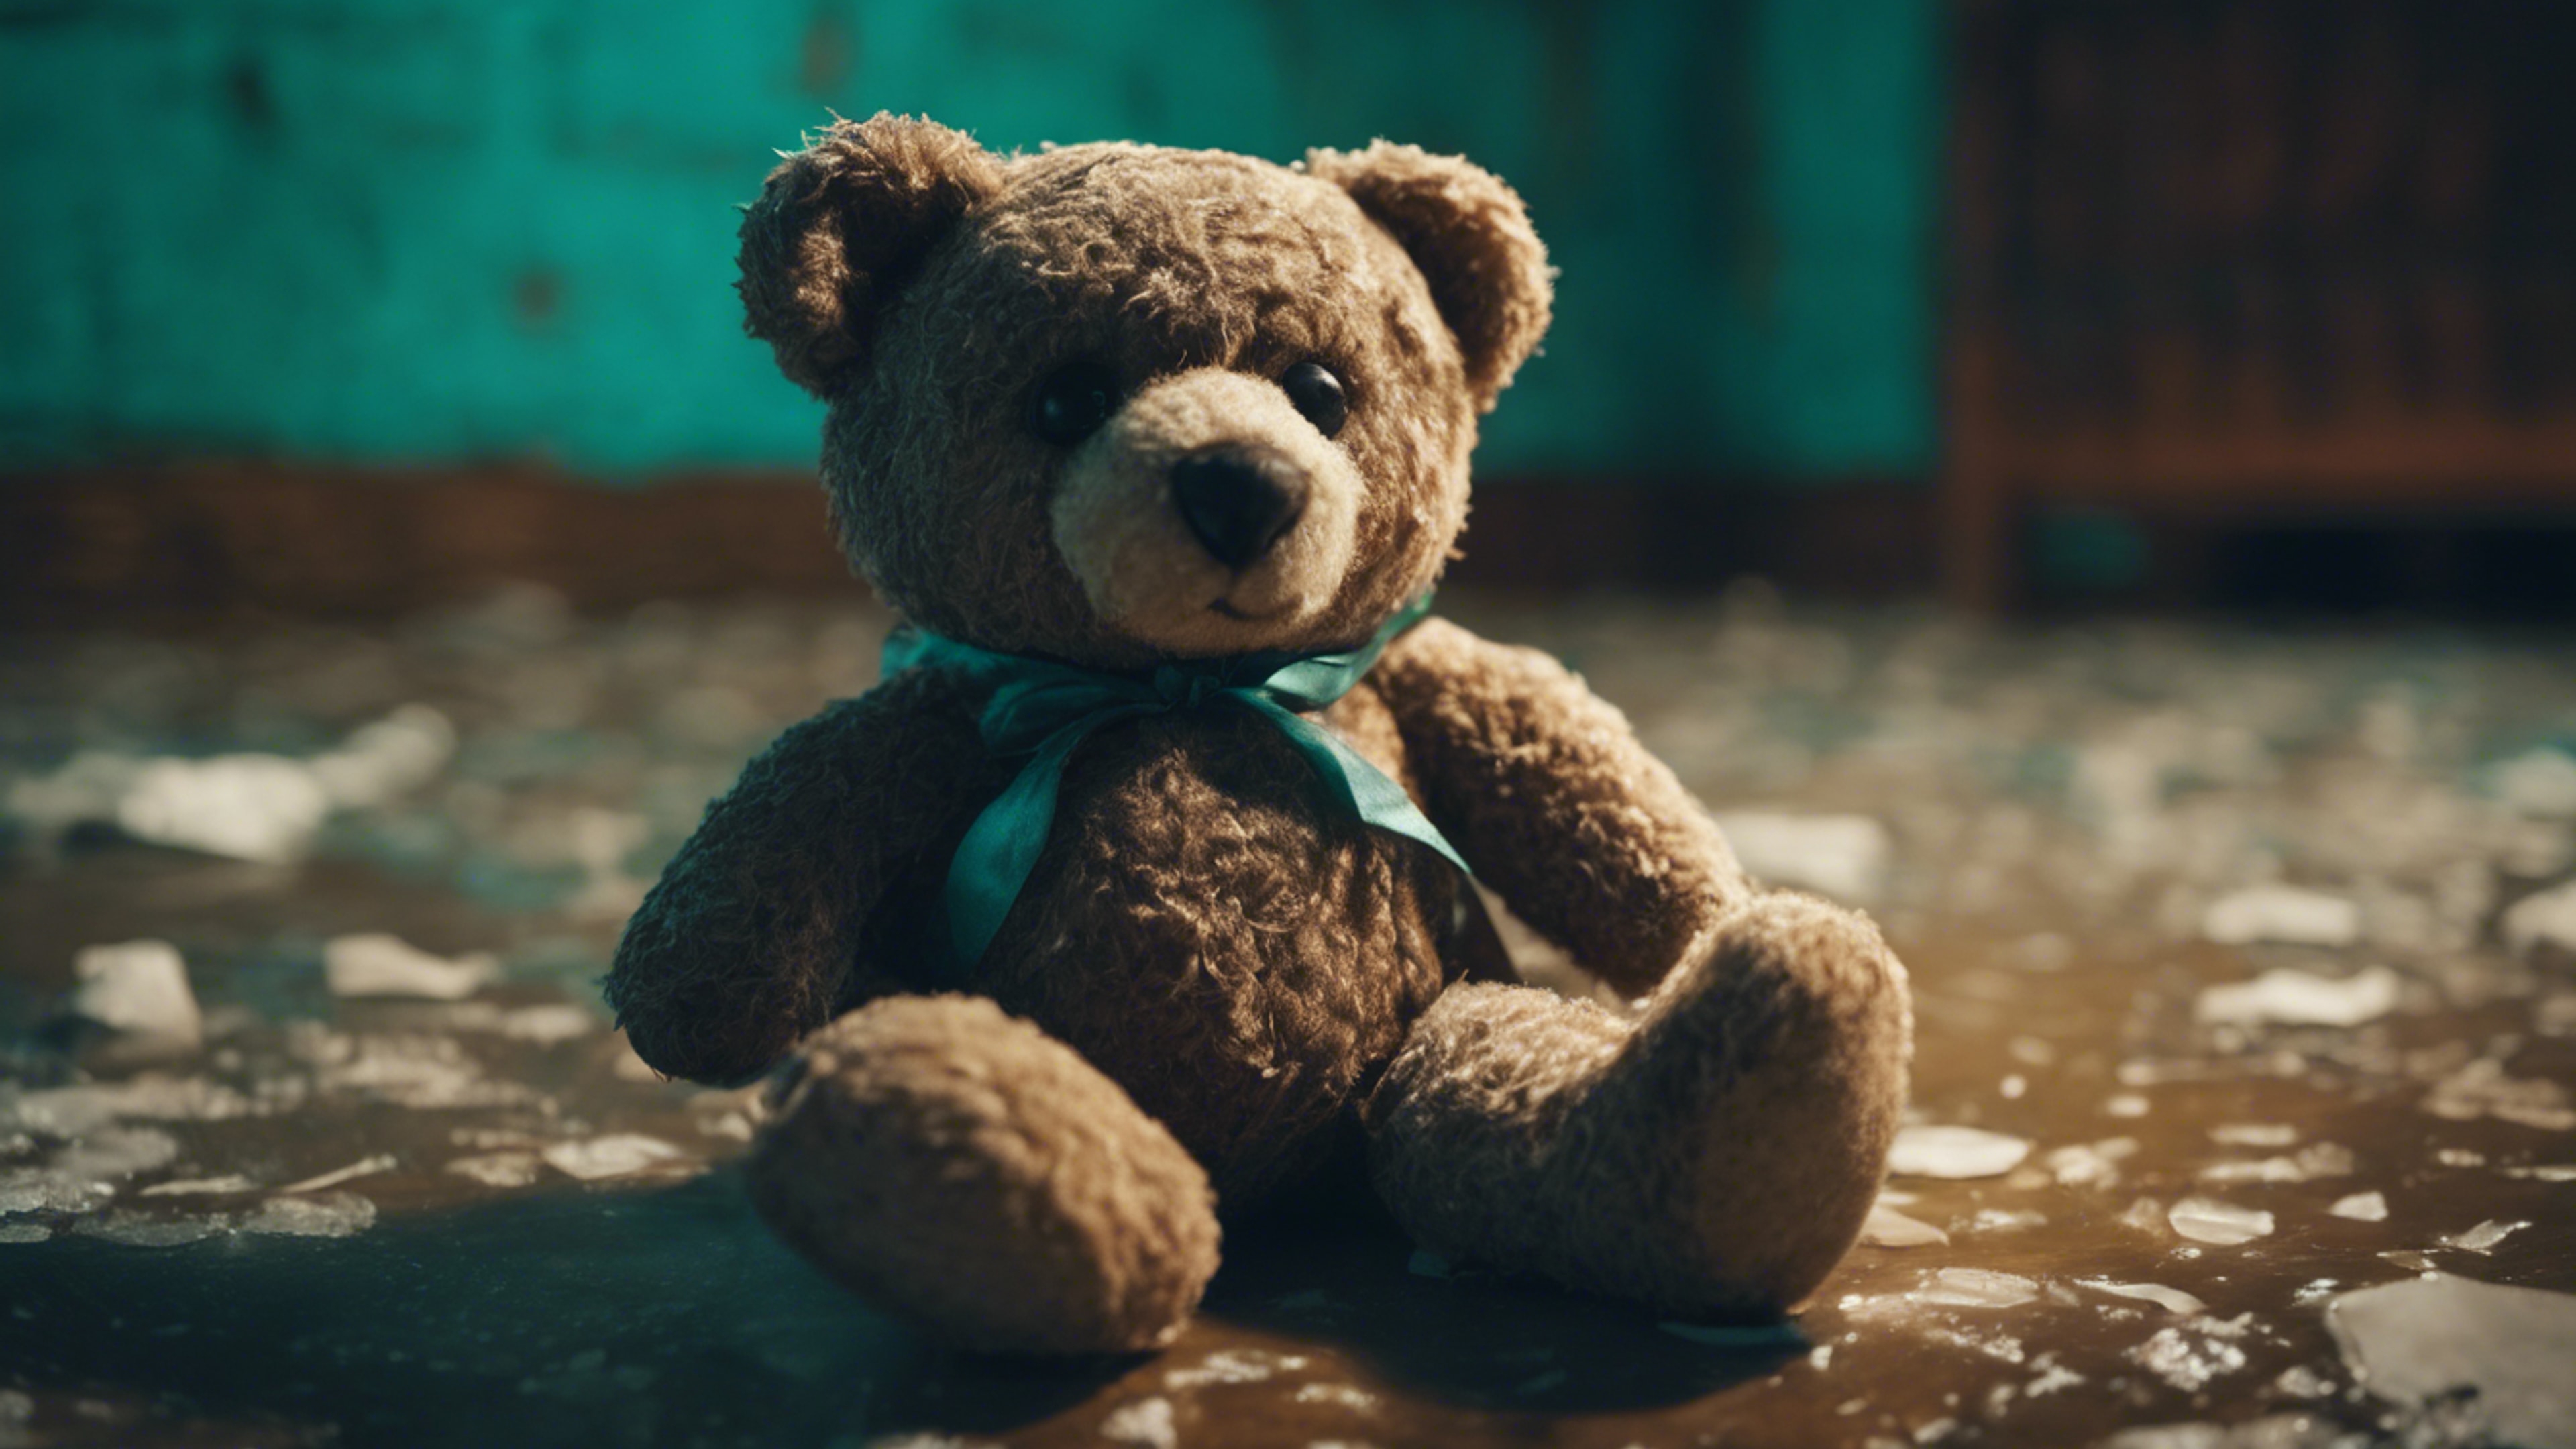 An orphaned gothic teddy bear lying in a quiet abandoned room illuminated in teal. Wallpaper[f4613294cb5e4a2b934c]